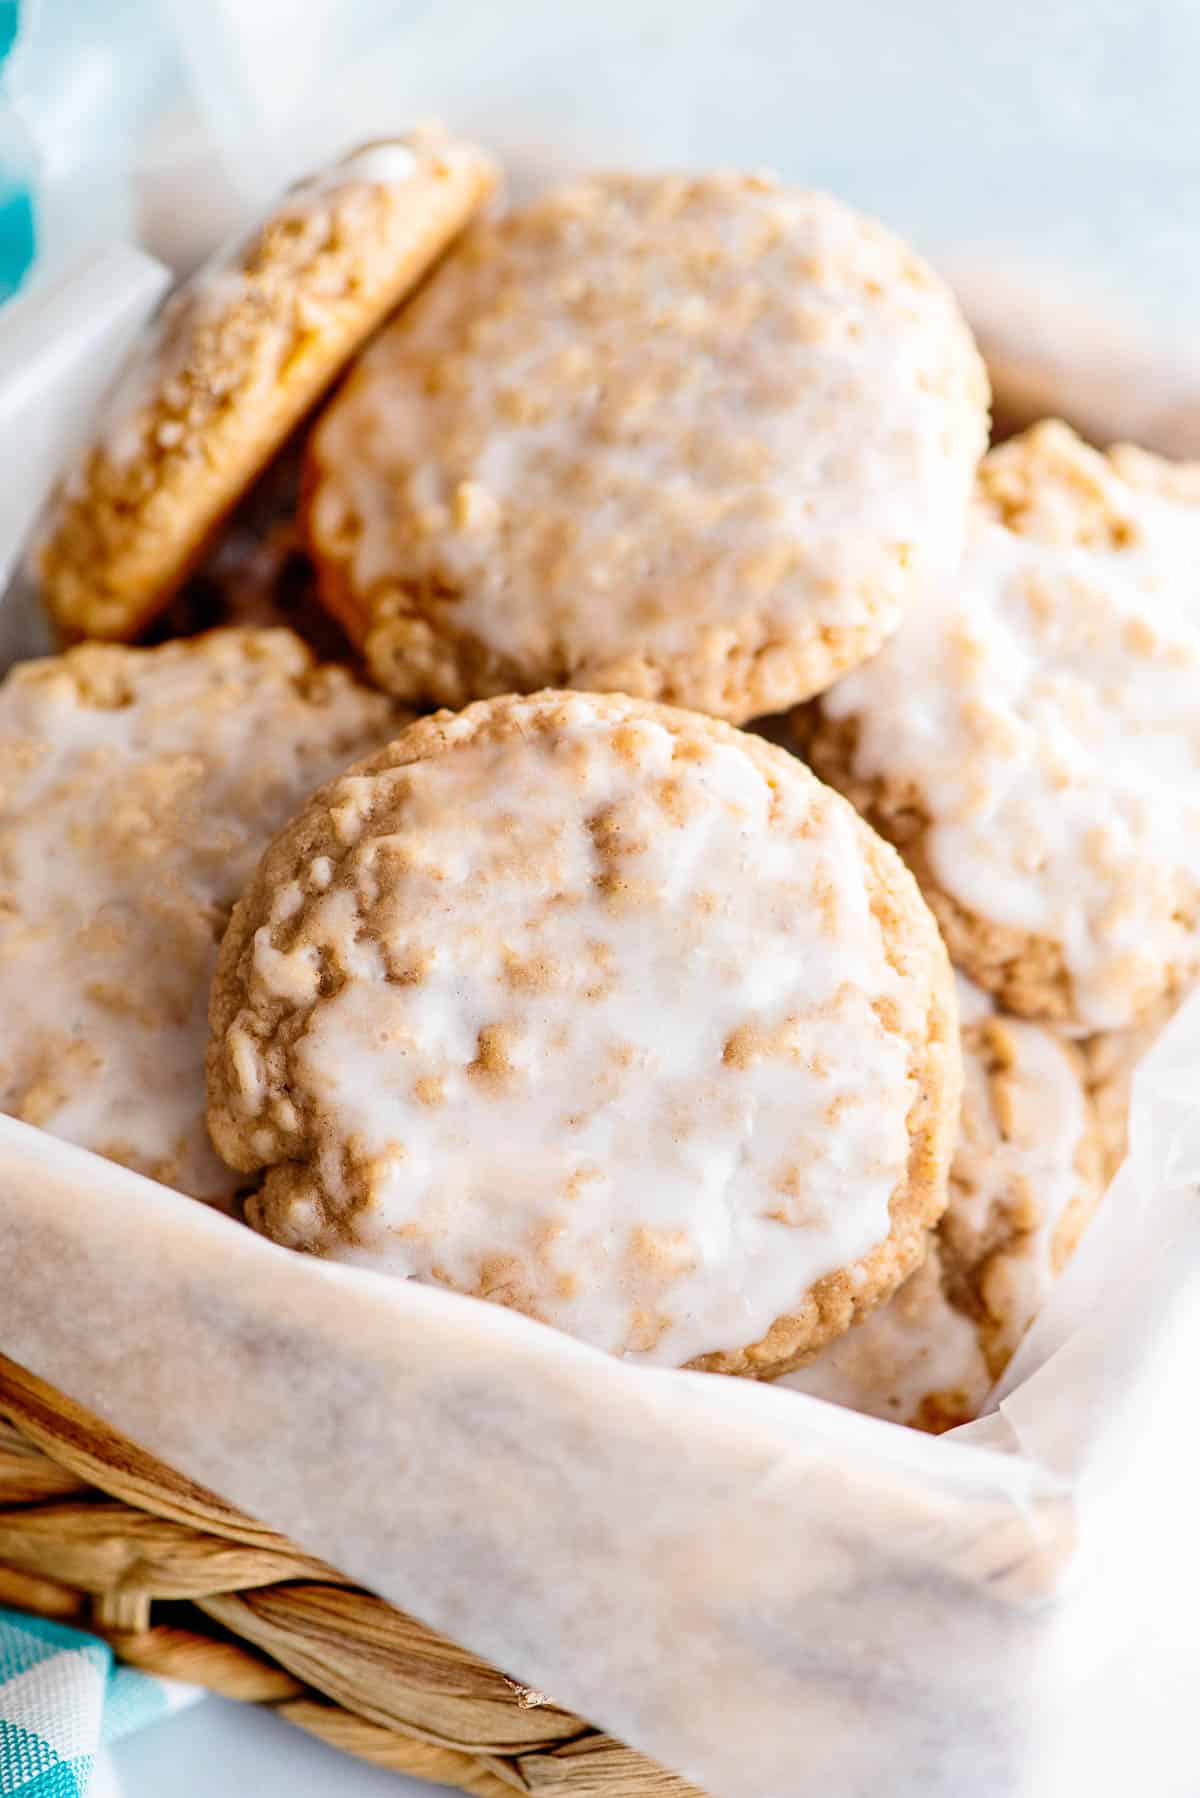 iced oatmeal cookies in a basket.